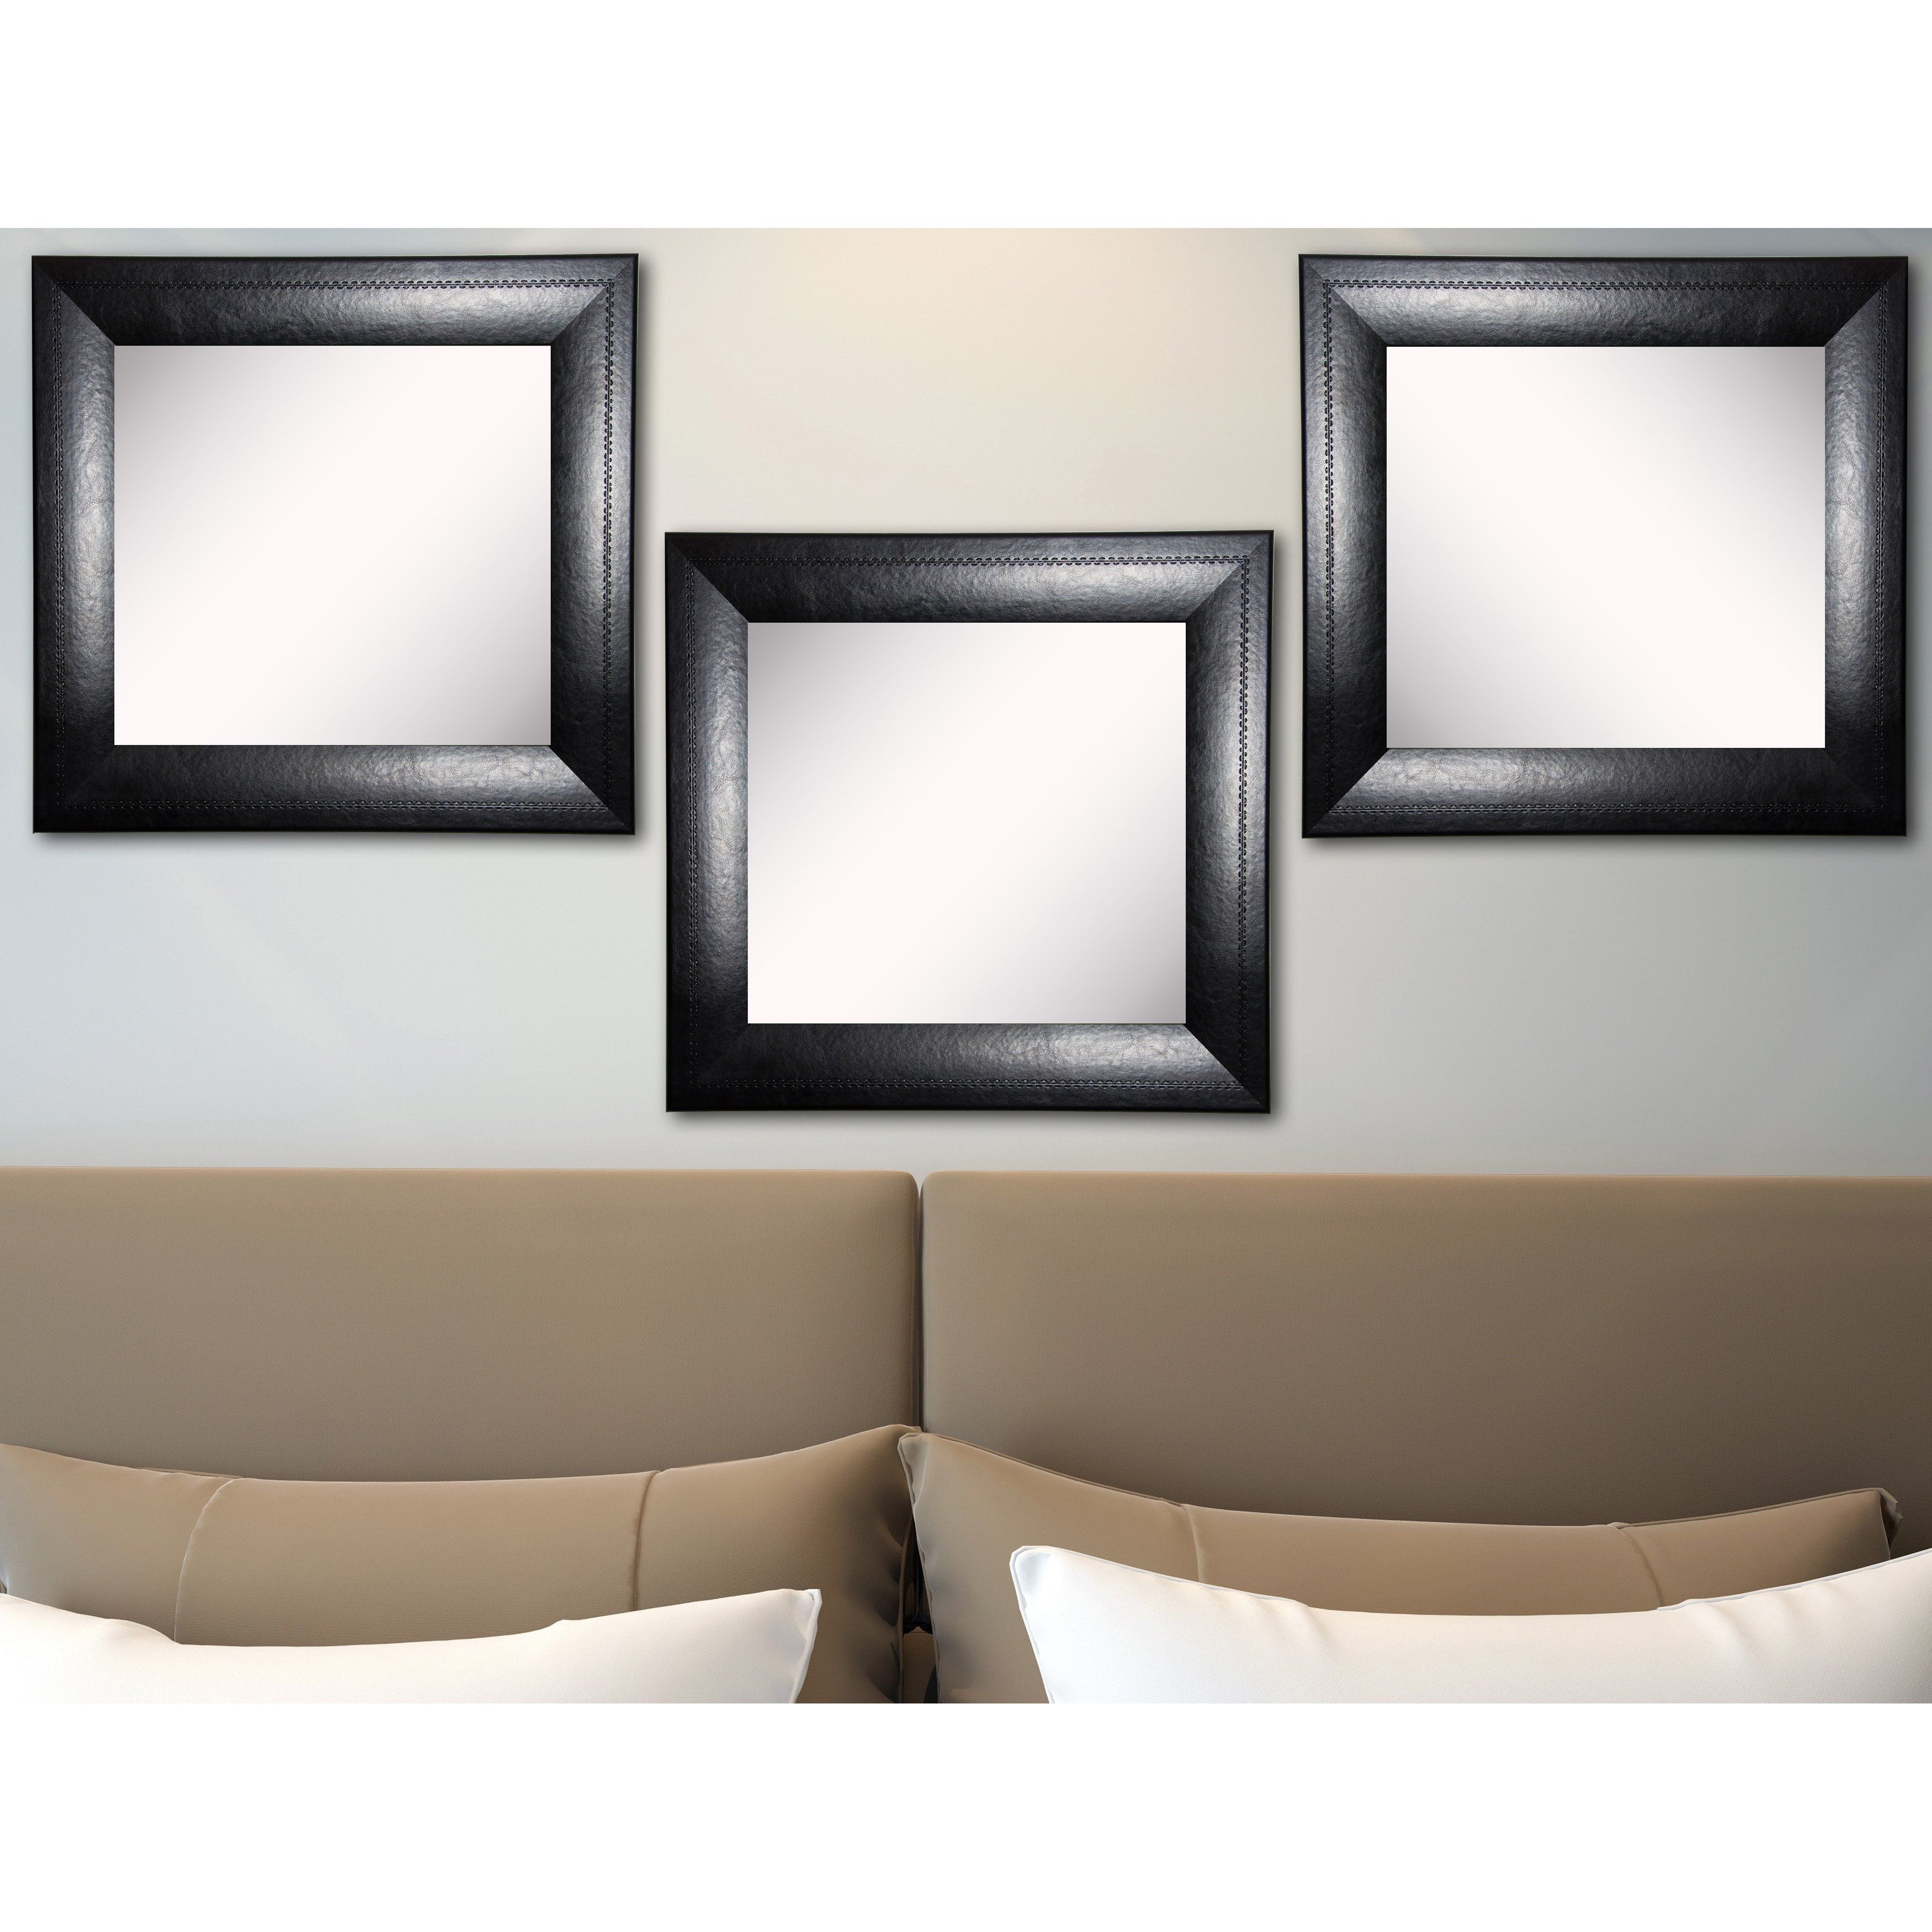 Rayne Mirrors Ava Stitched Black Leather Wall Mirror Wayfair Intended For Leather Wall Mirrors (View 5 of 15)